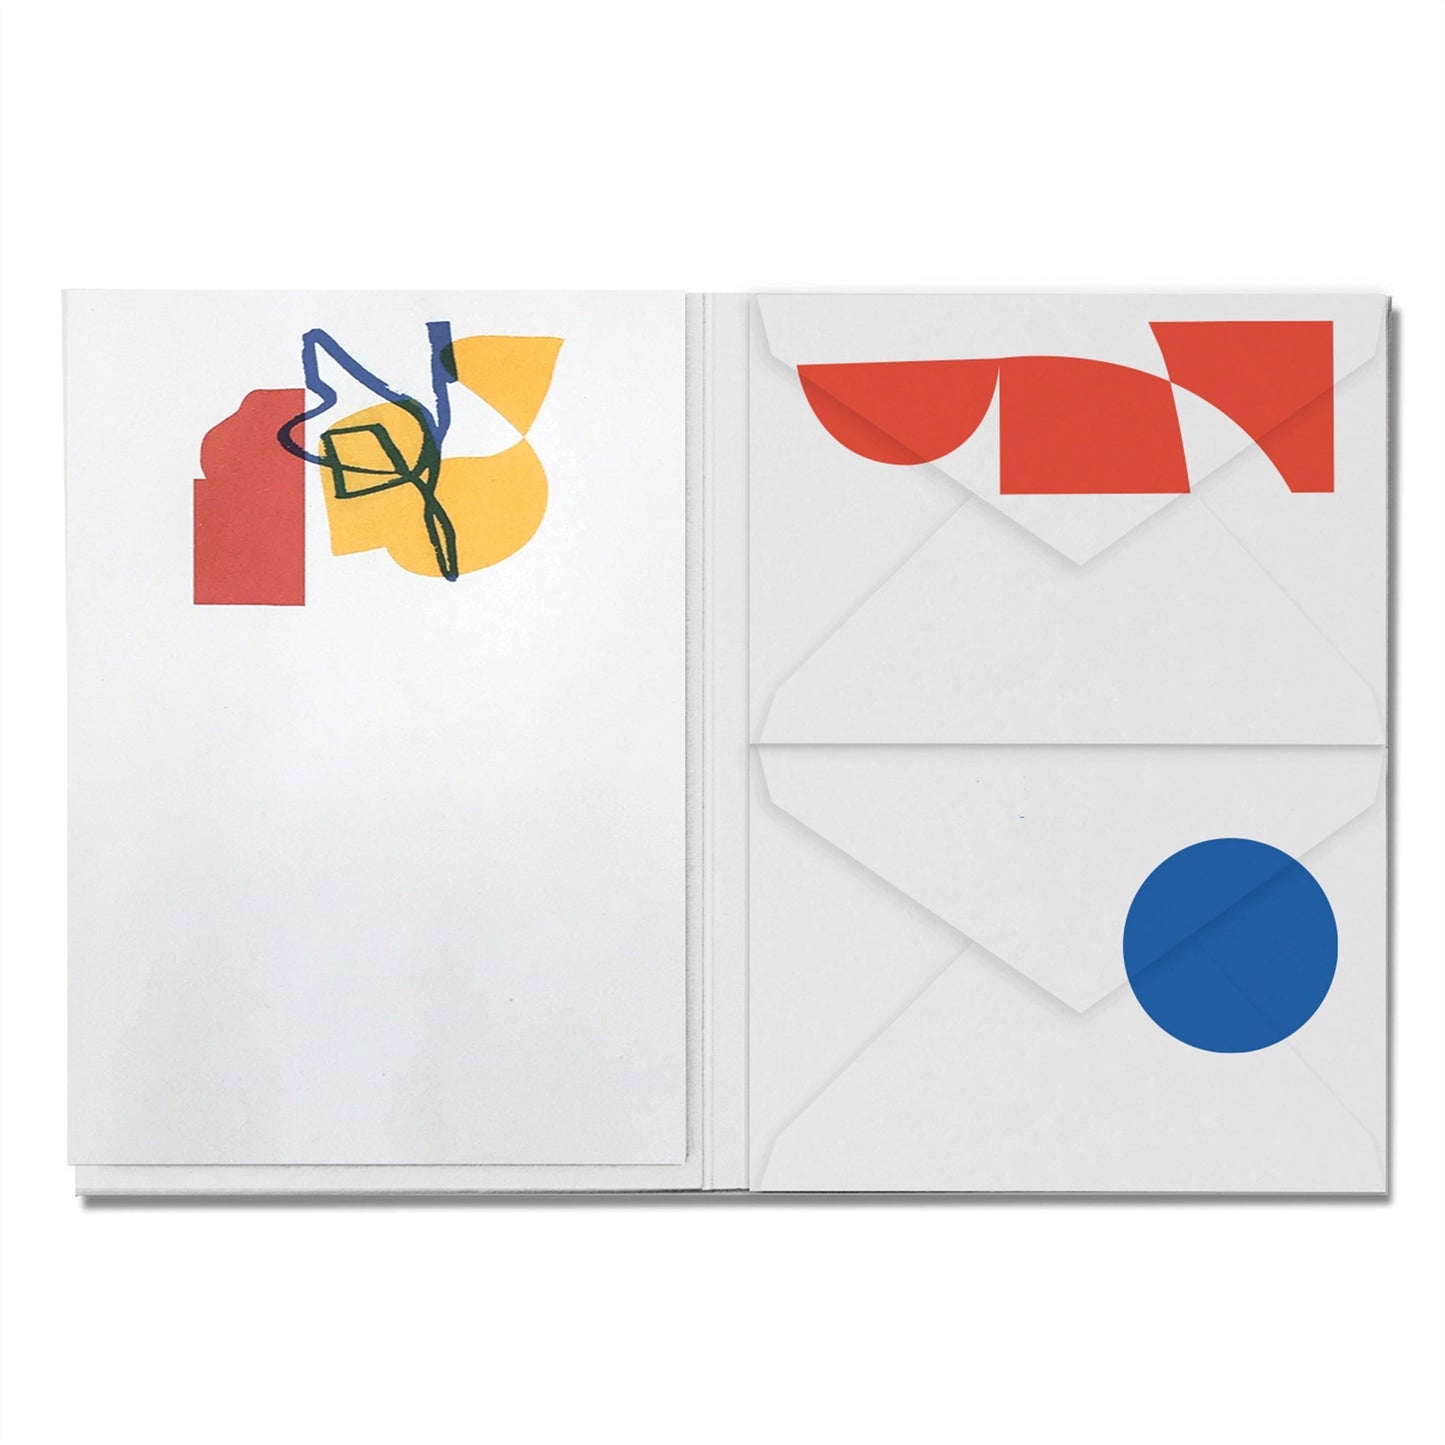 Rby Letterquette Stationery Set